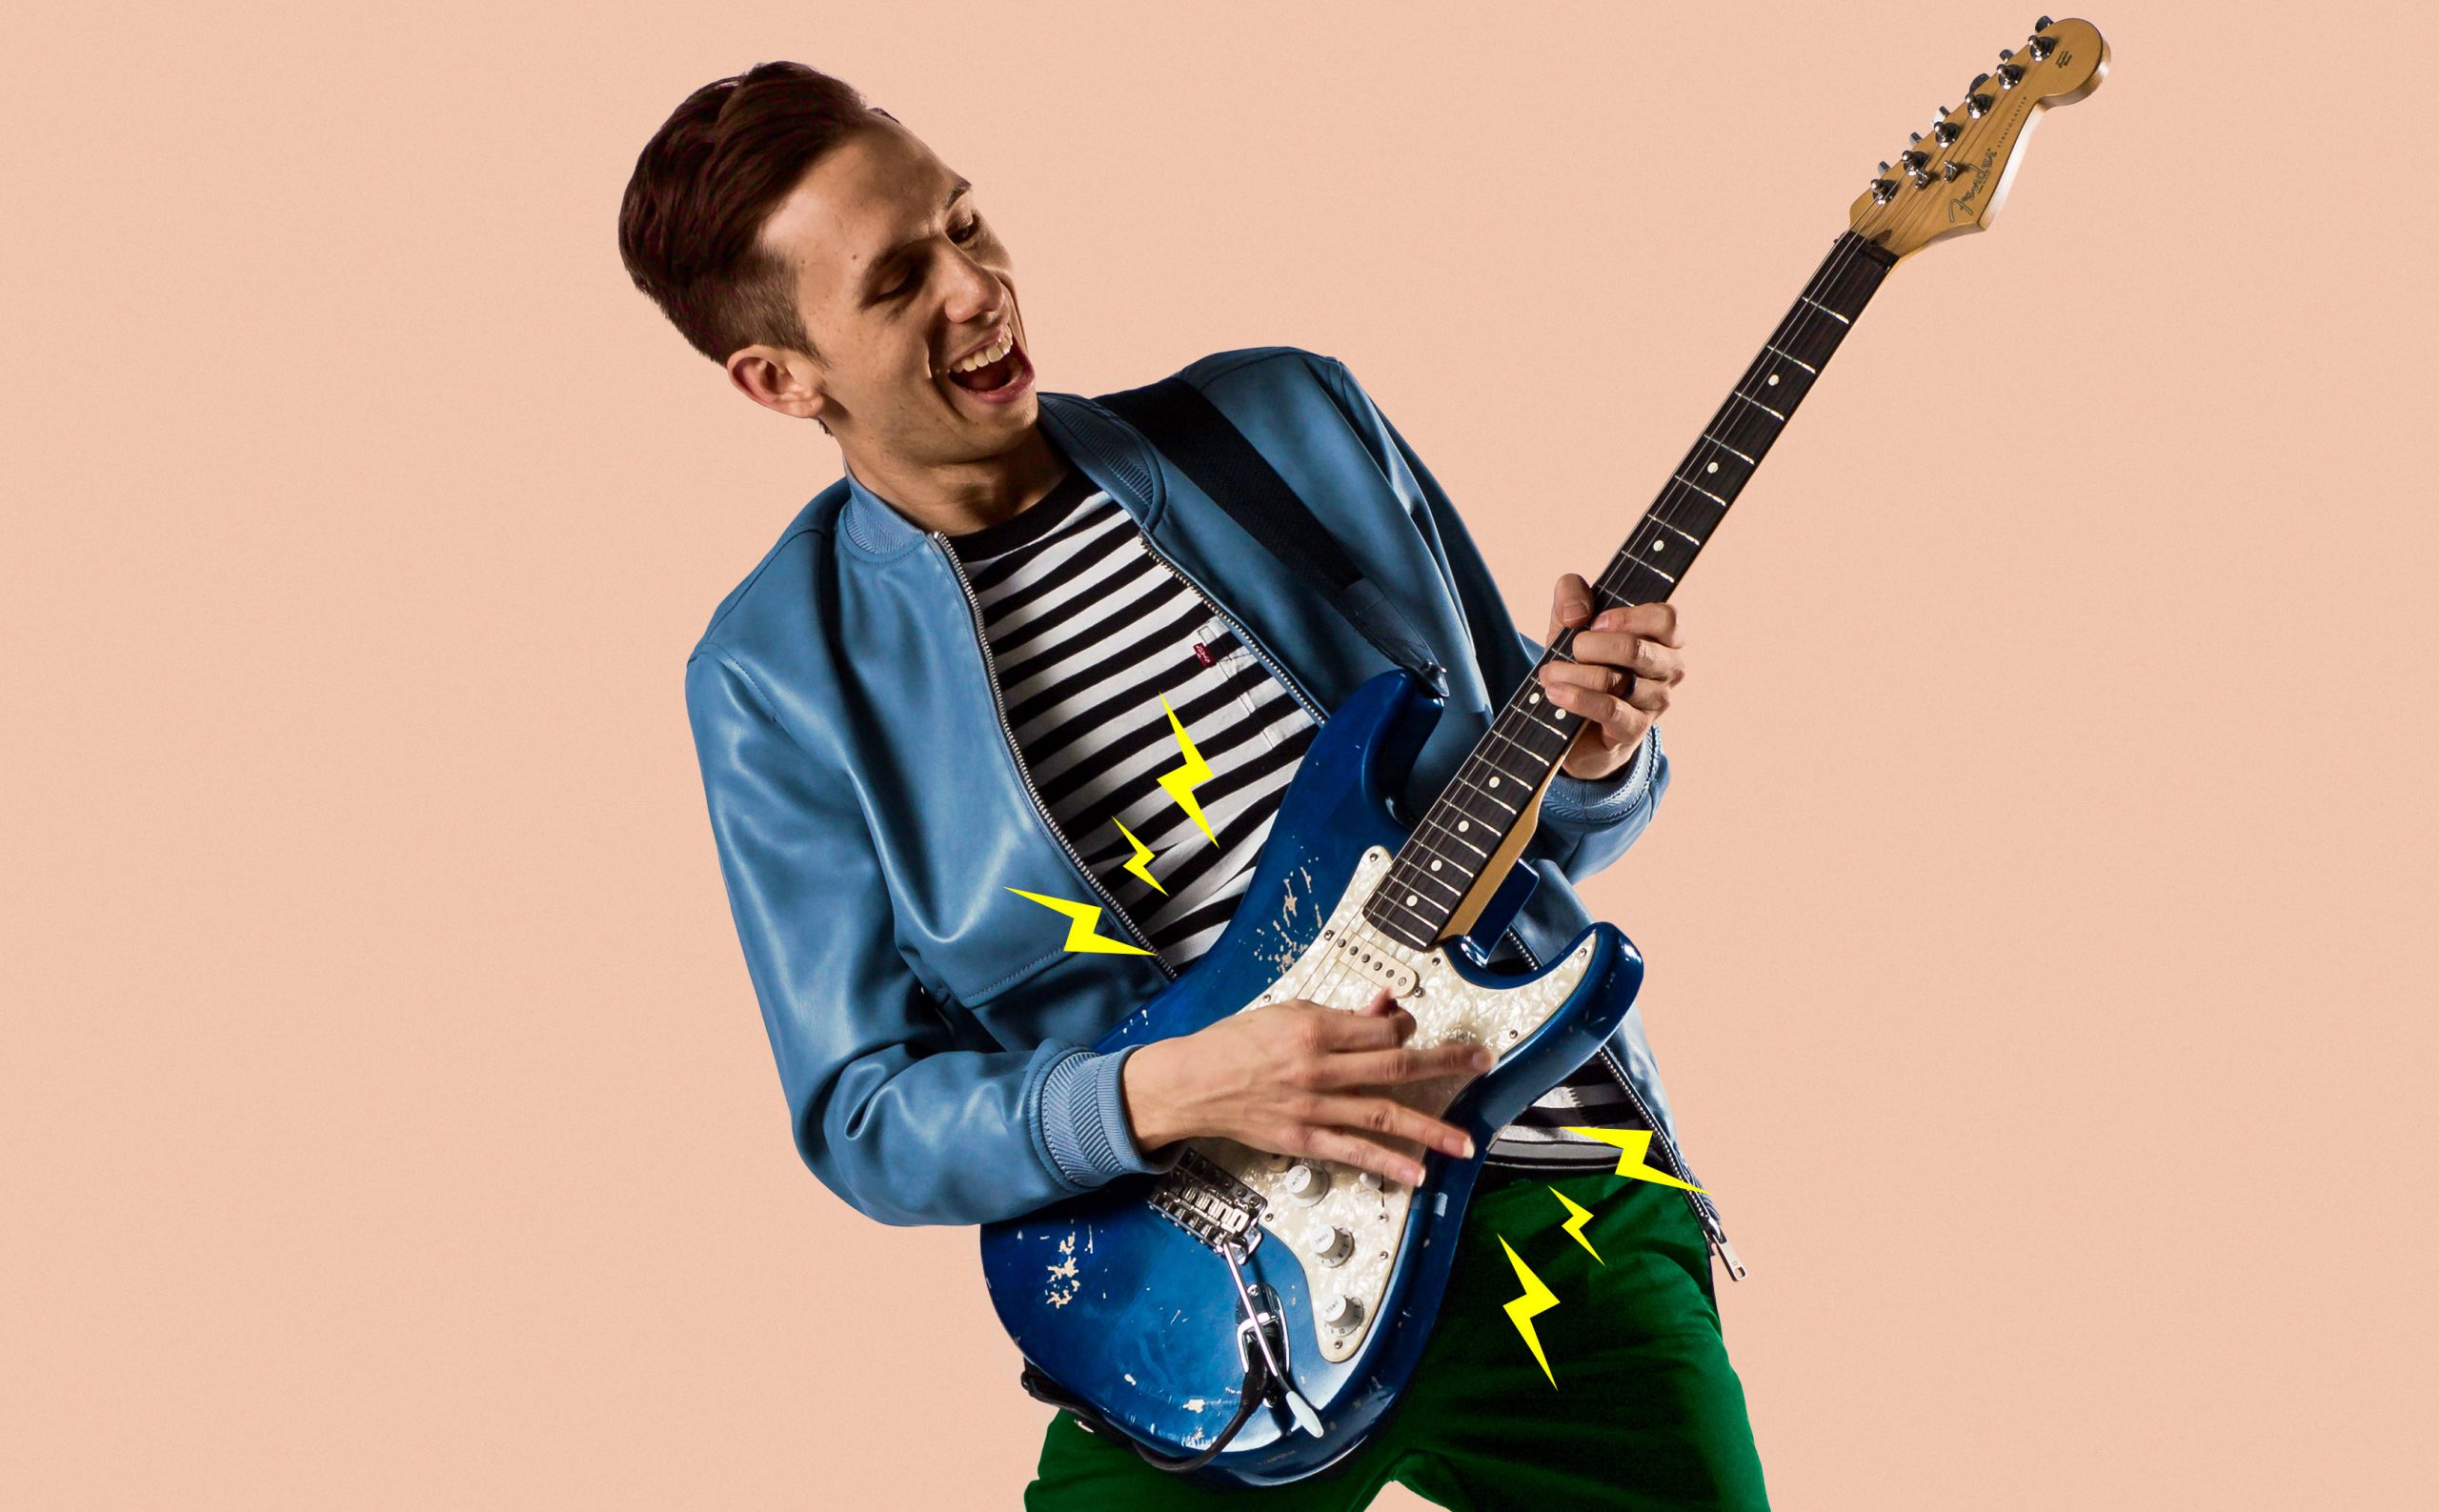 Vulfpeck guitarist Cory Wong announces huge UK tour for February 2020